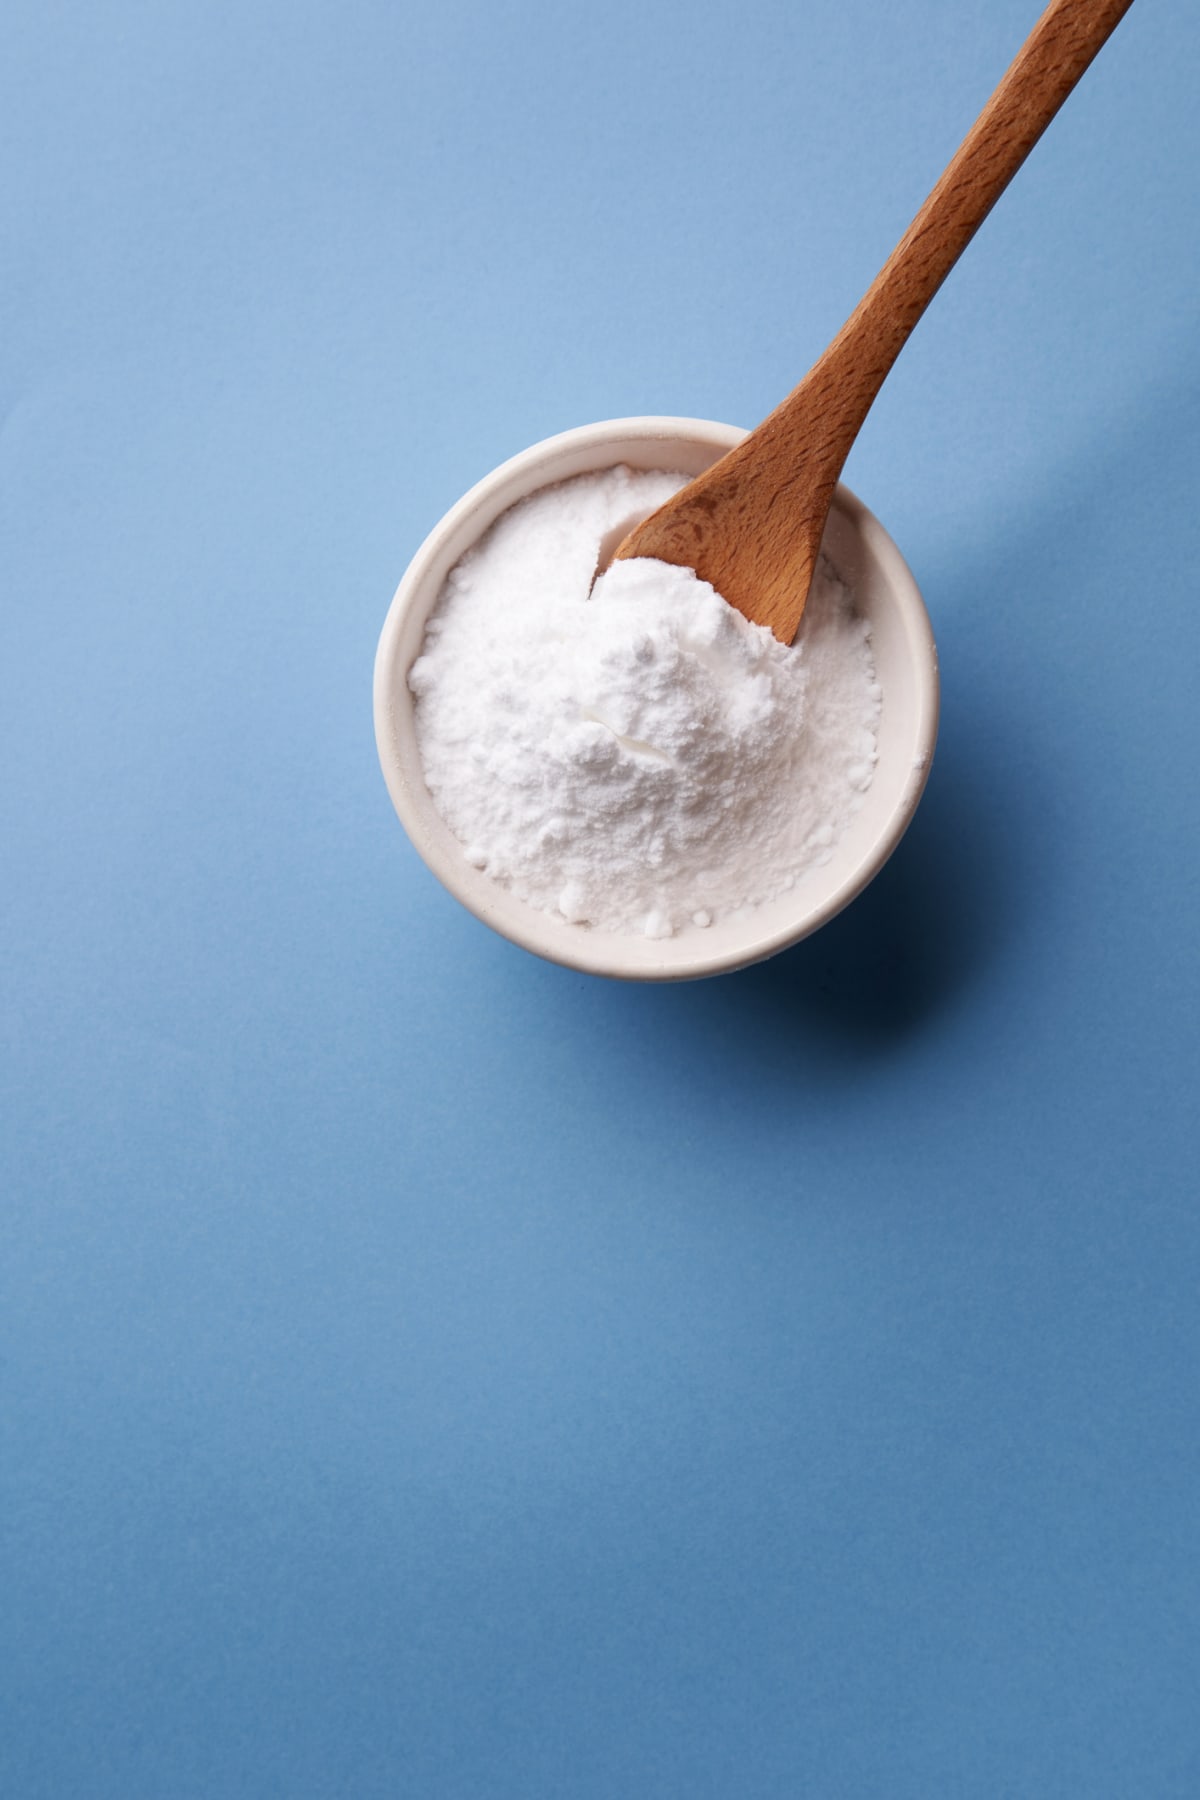 Bowl of baking soda with a wooden spoon against a blue background